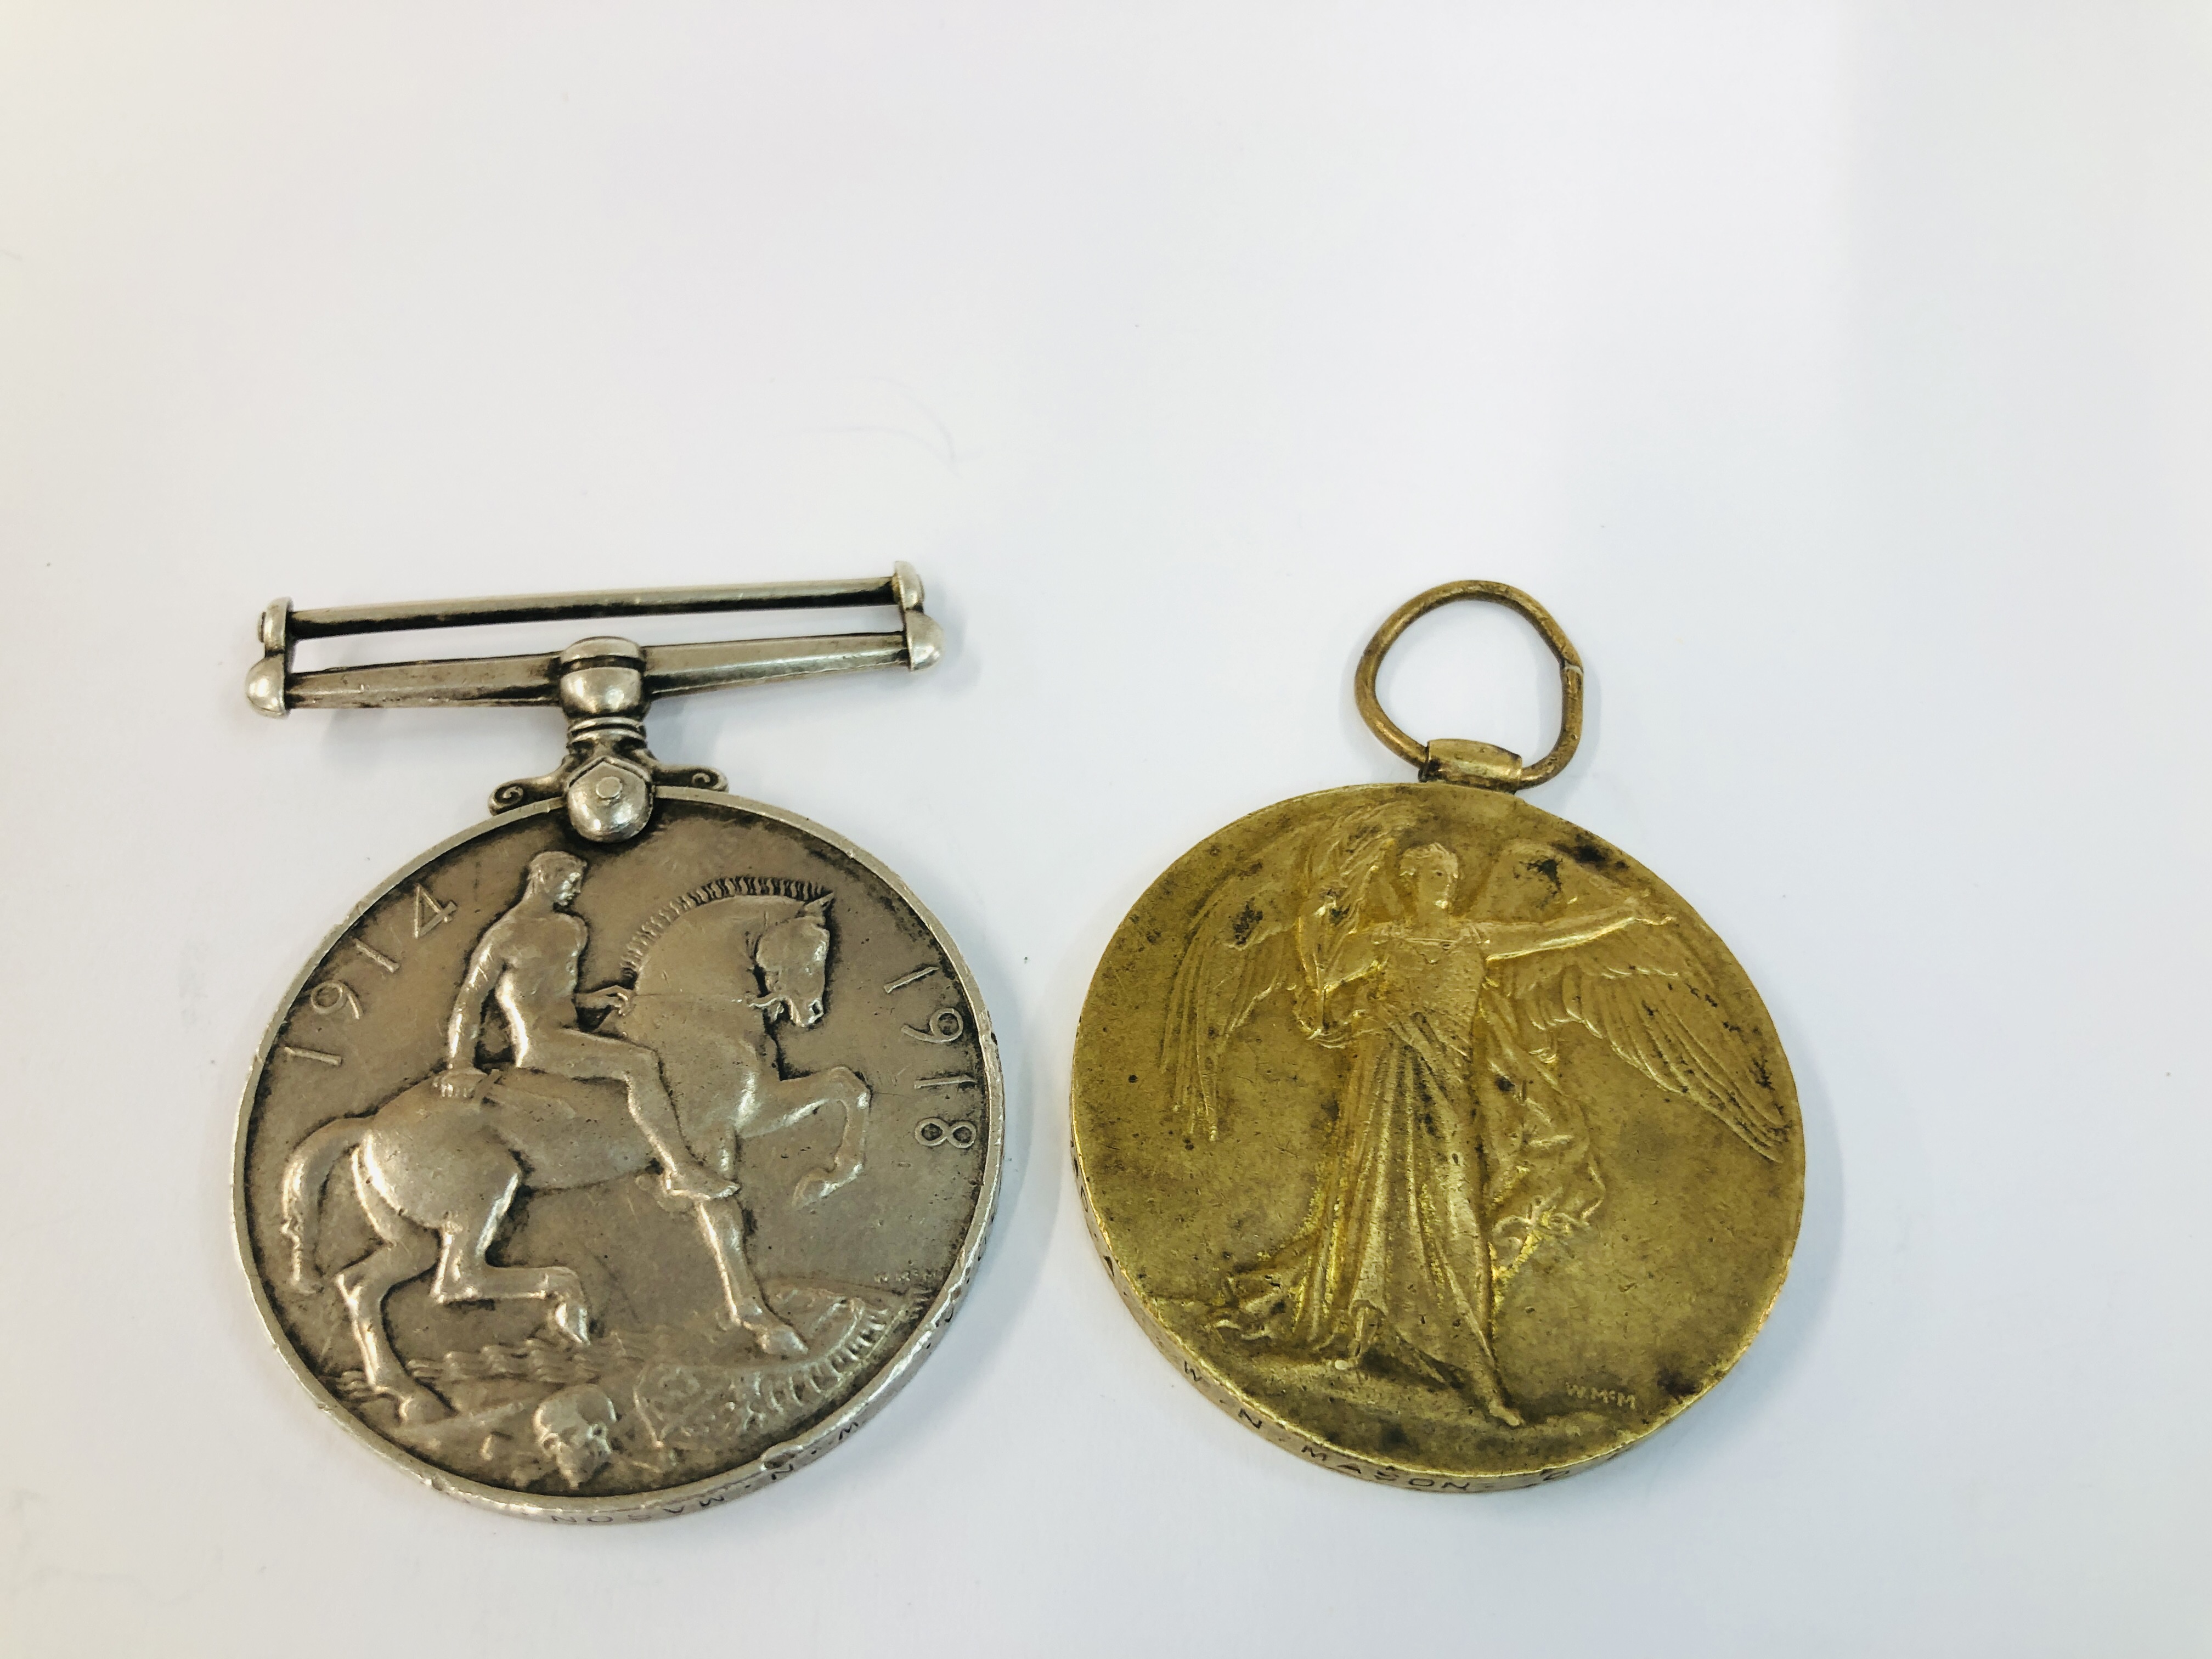 2 MEDALS FROM WW1 1914-1919 & 1914-1918 "THE GREAT WAR FOR CIVILISATION" PRESENTED TO W.N. MASON D.